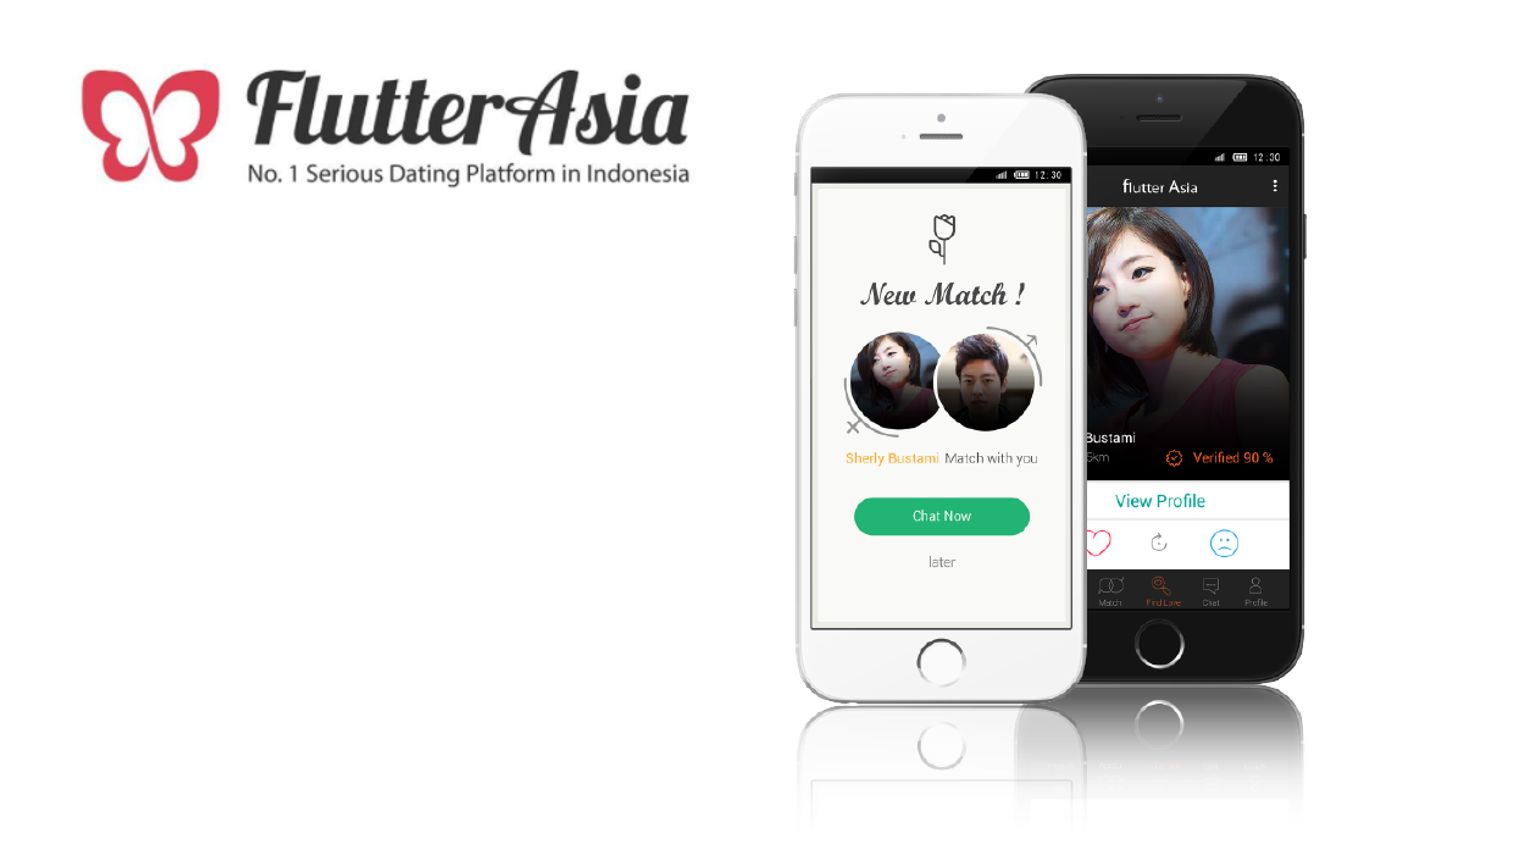 Indonesia Dating App Flutter Asia Buys Perfect Match Jakarta